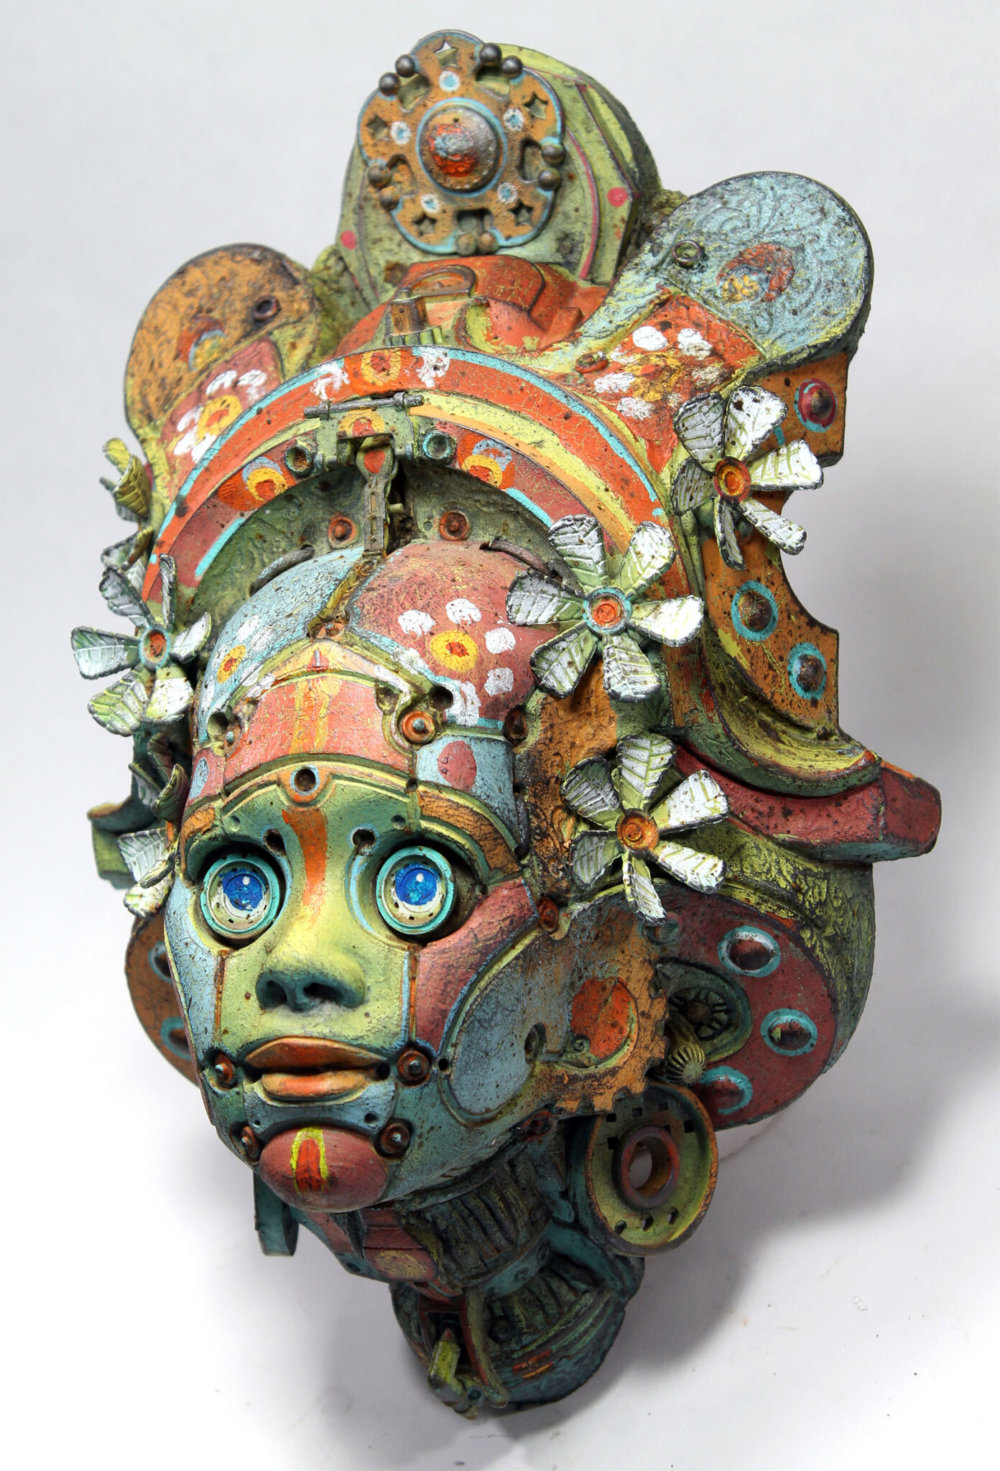 Relics Of The Future Futuristic Steampunk Resin Sculptures By Tomas Barcelo 6